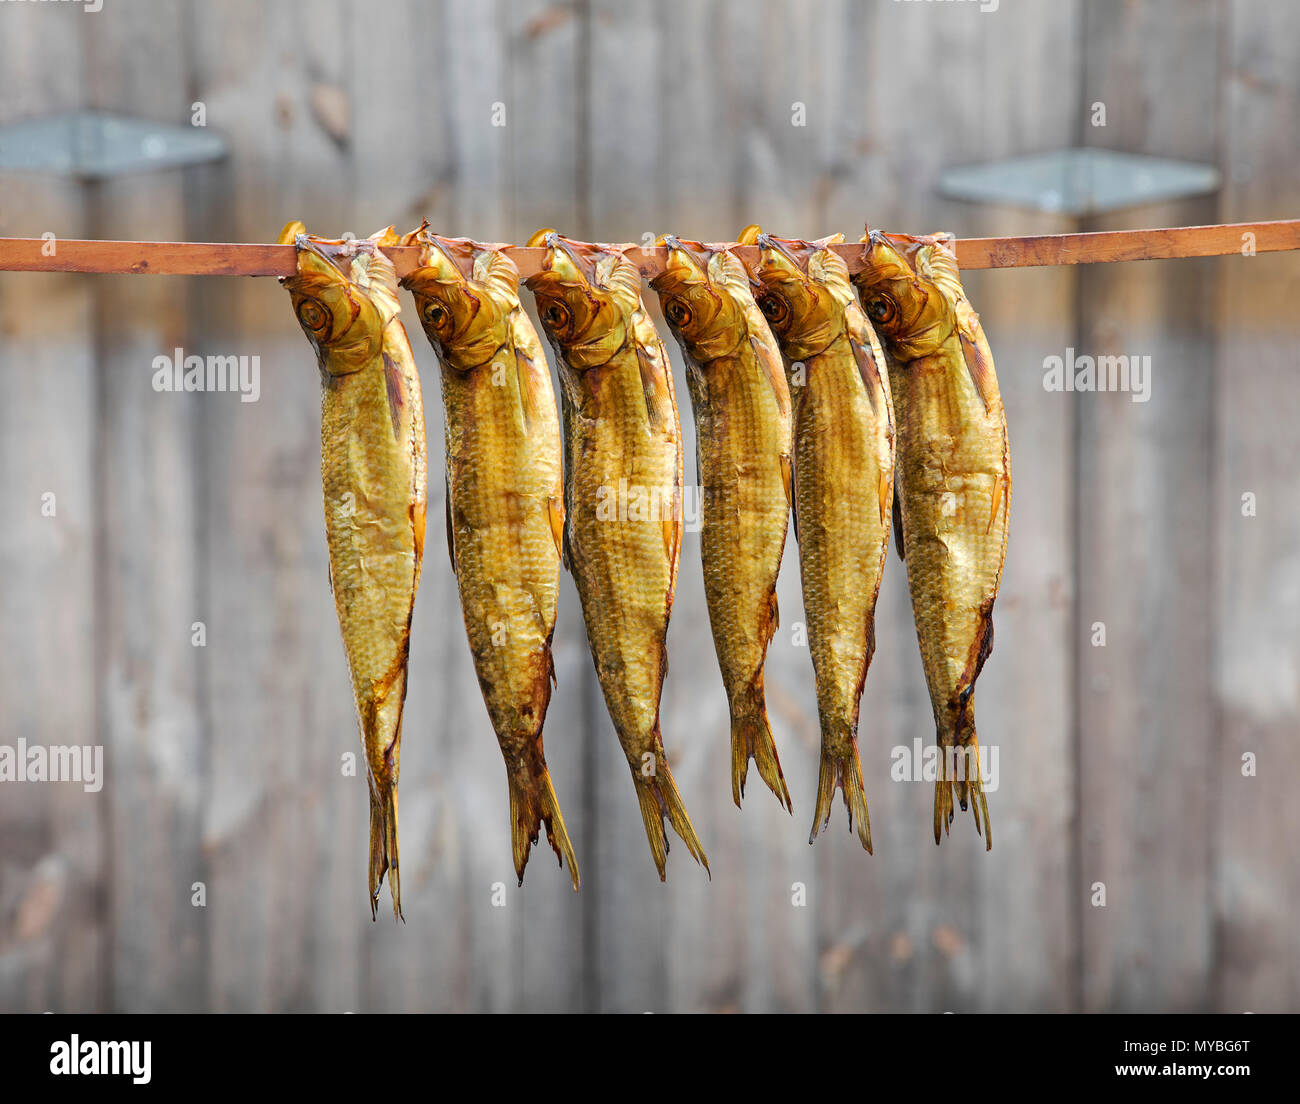 Alewives hanging in front of smokehouse to preserve and dry. Stock Photo